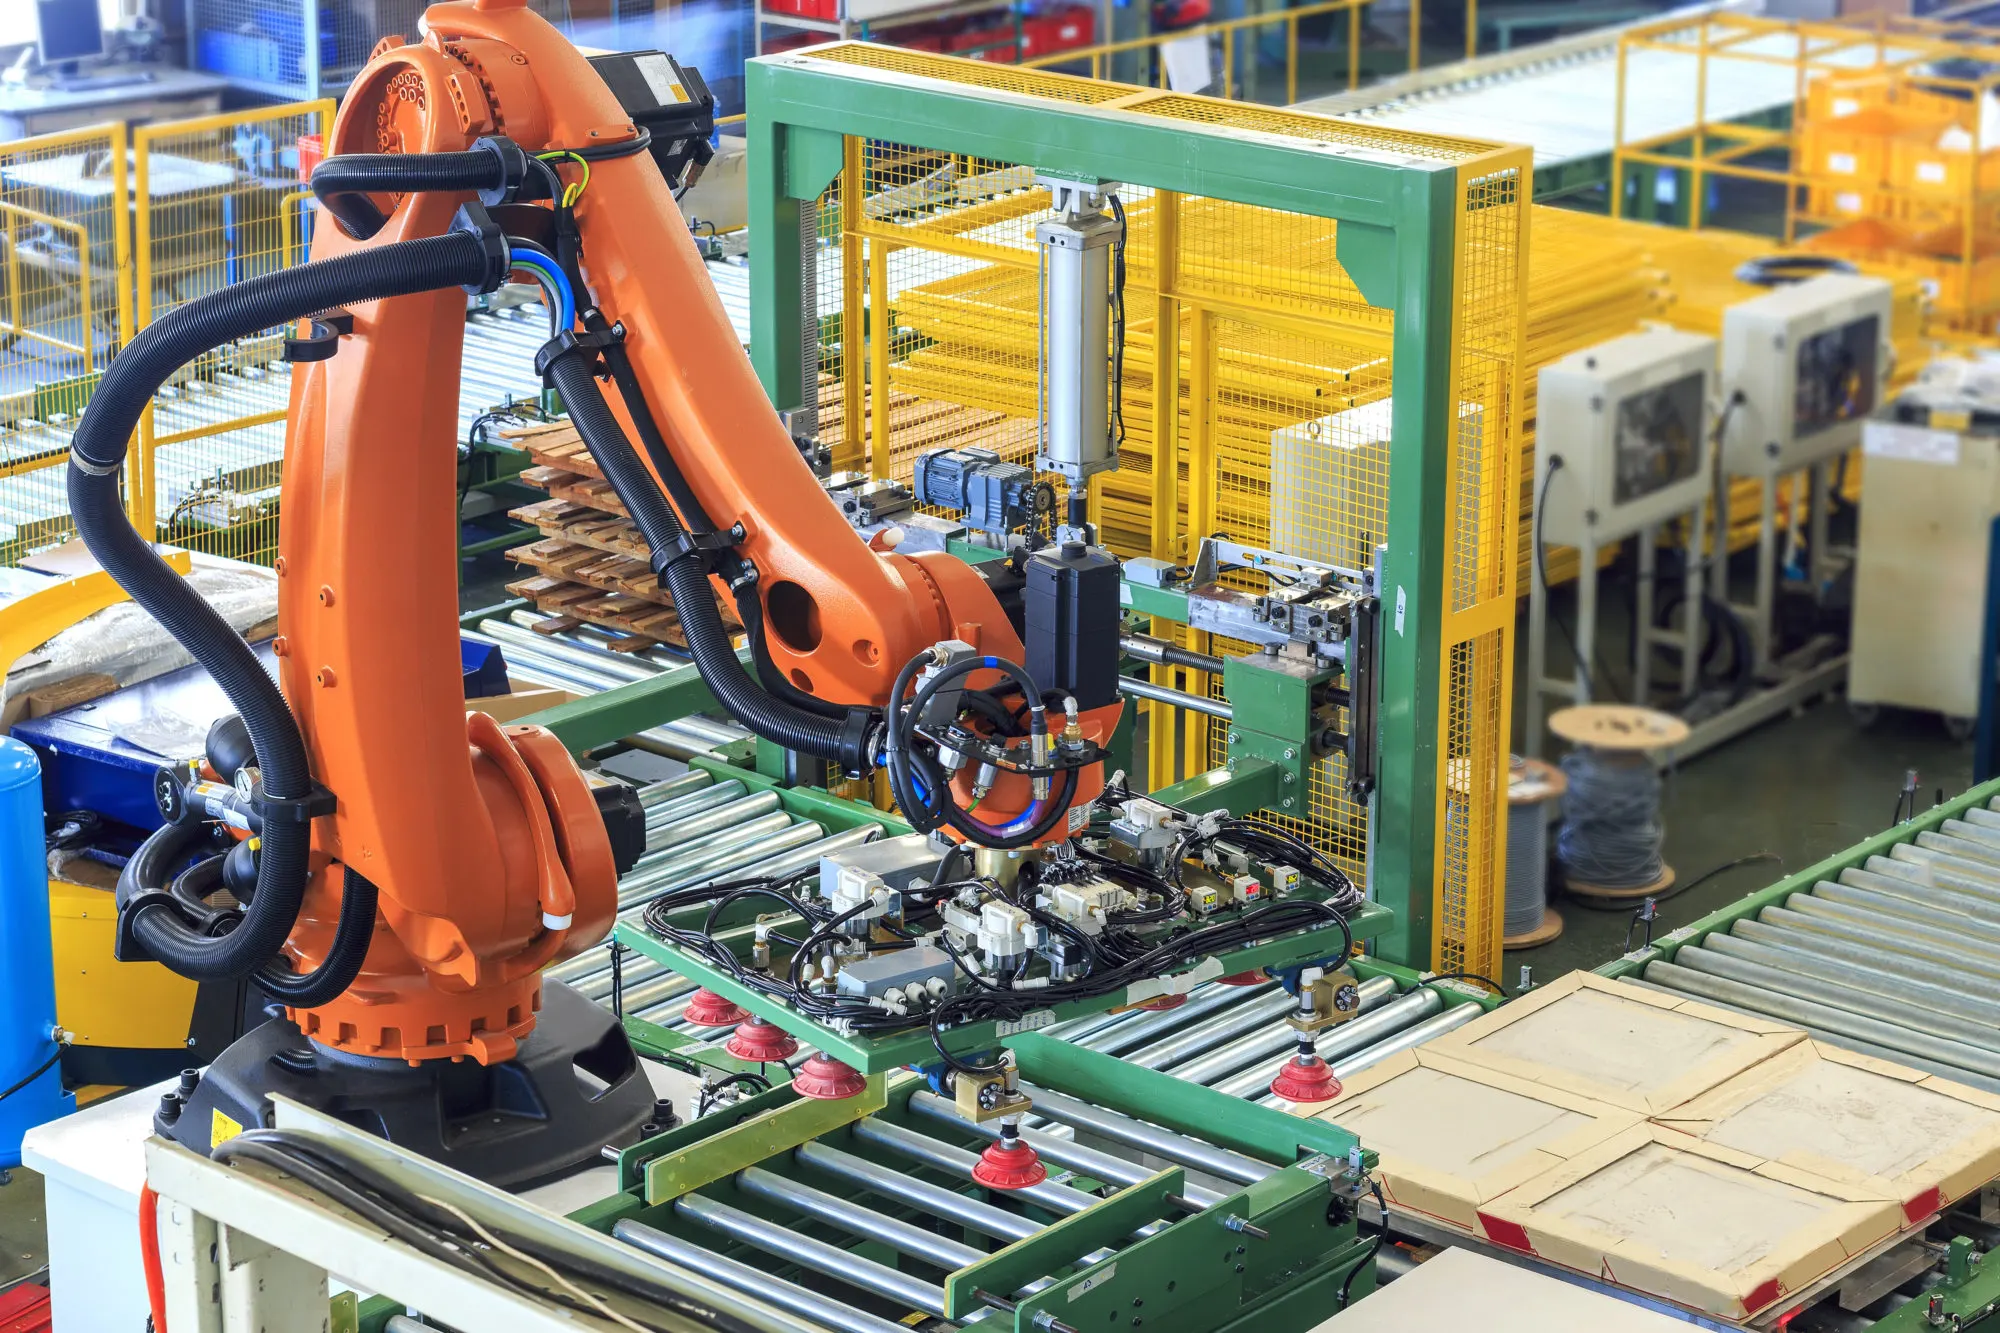 Robotic automatic integration with automatic shore hardness testing system.